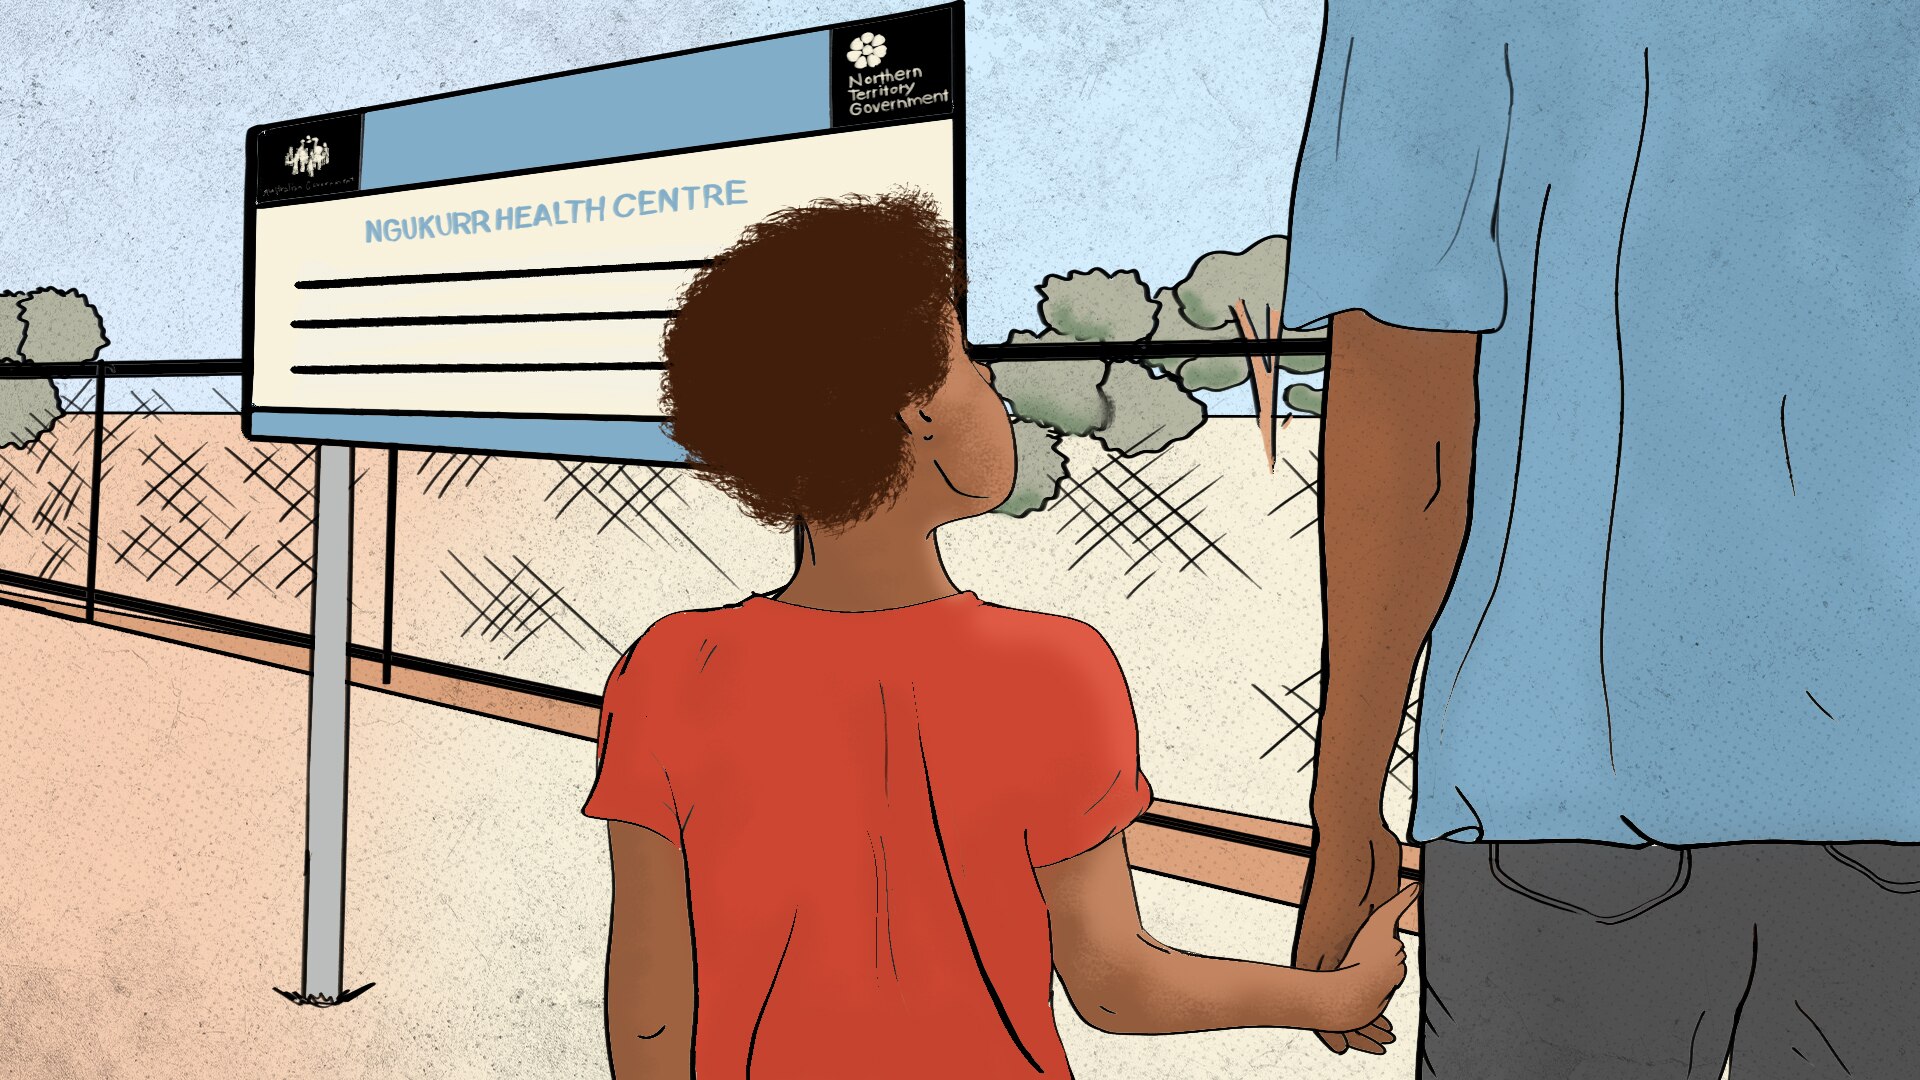 An illustration of a young person holding hands with an adult facing a fence and a sign